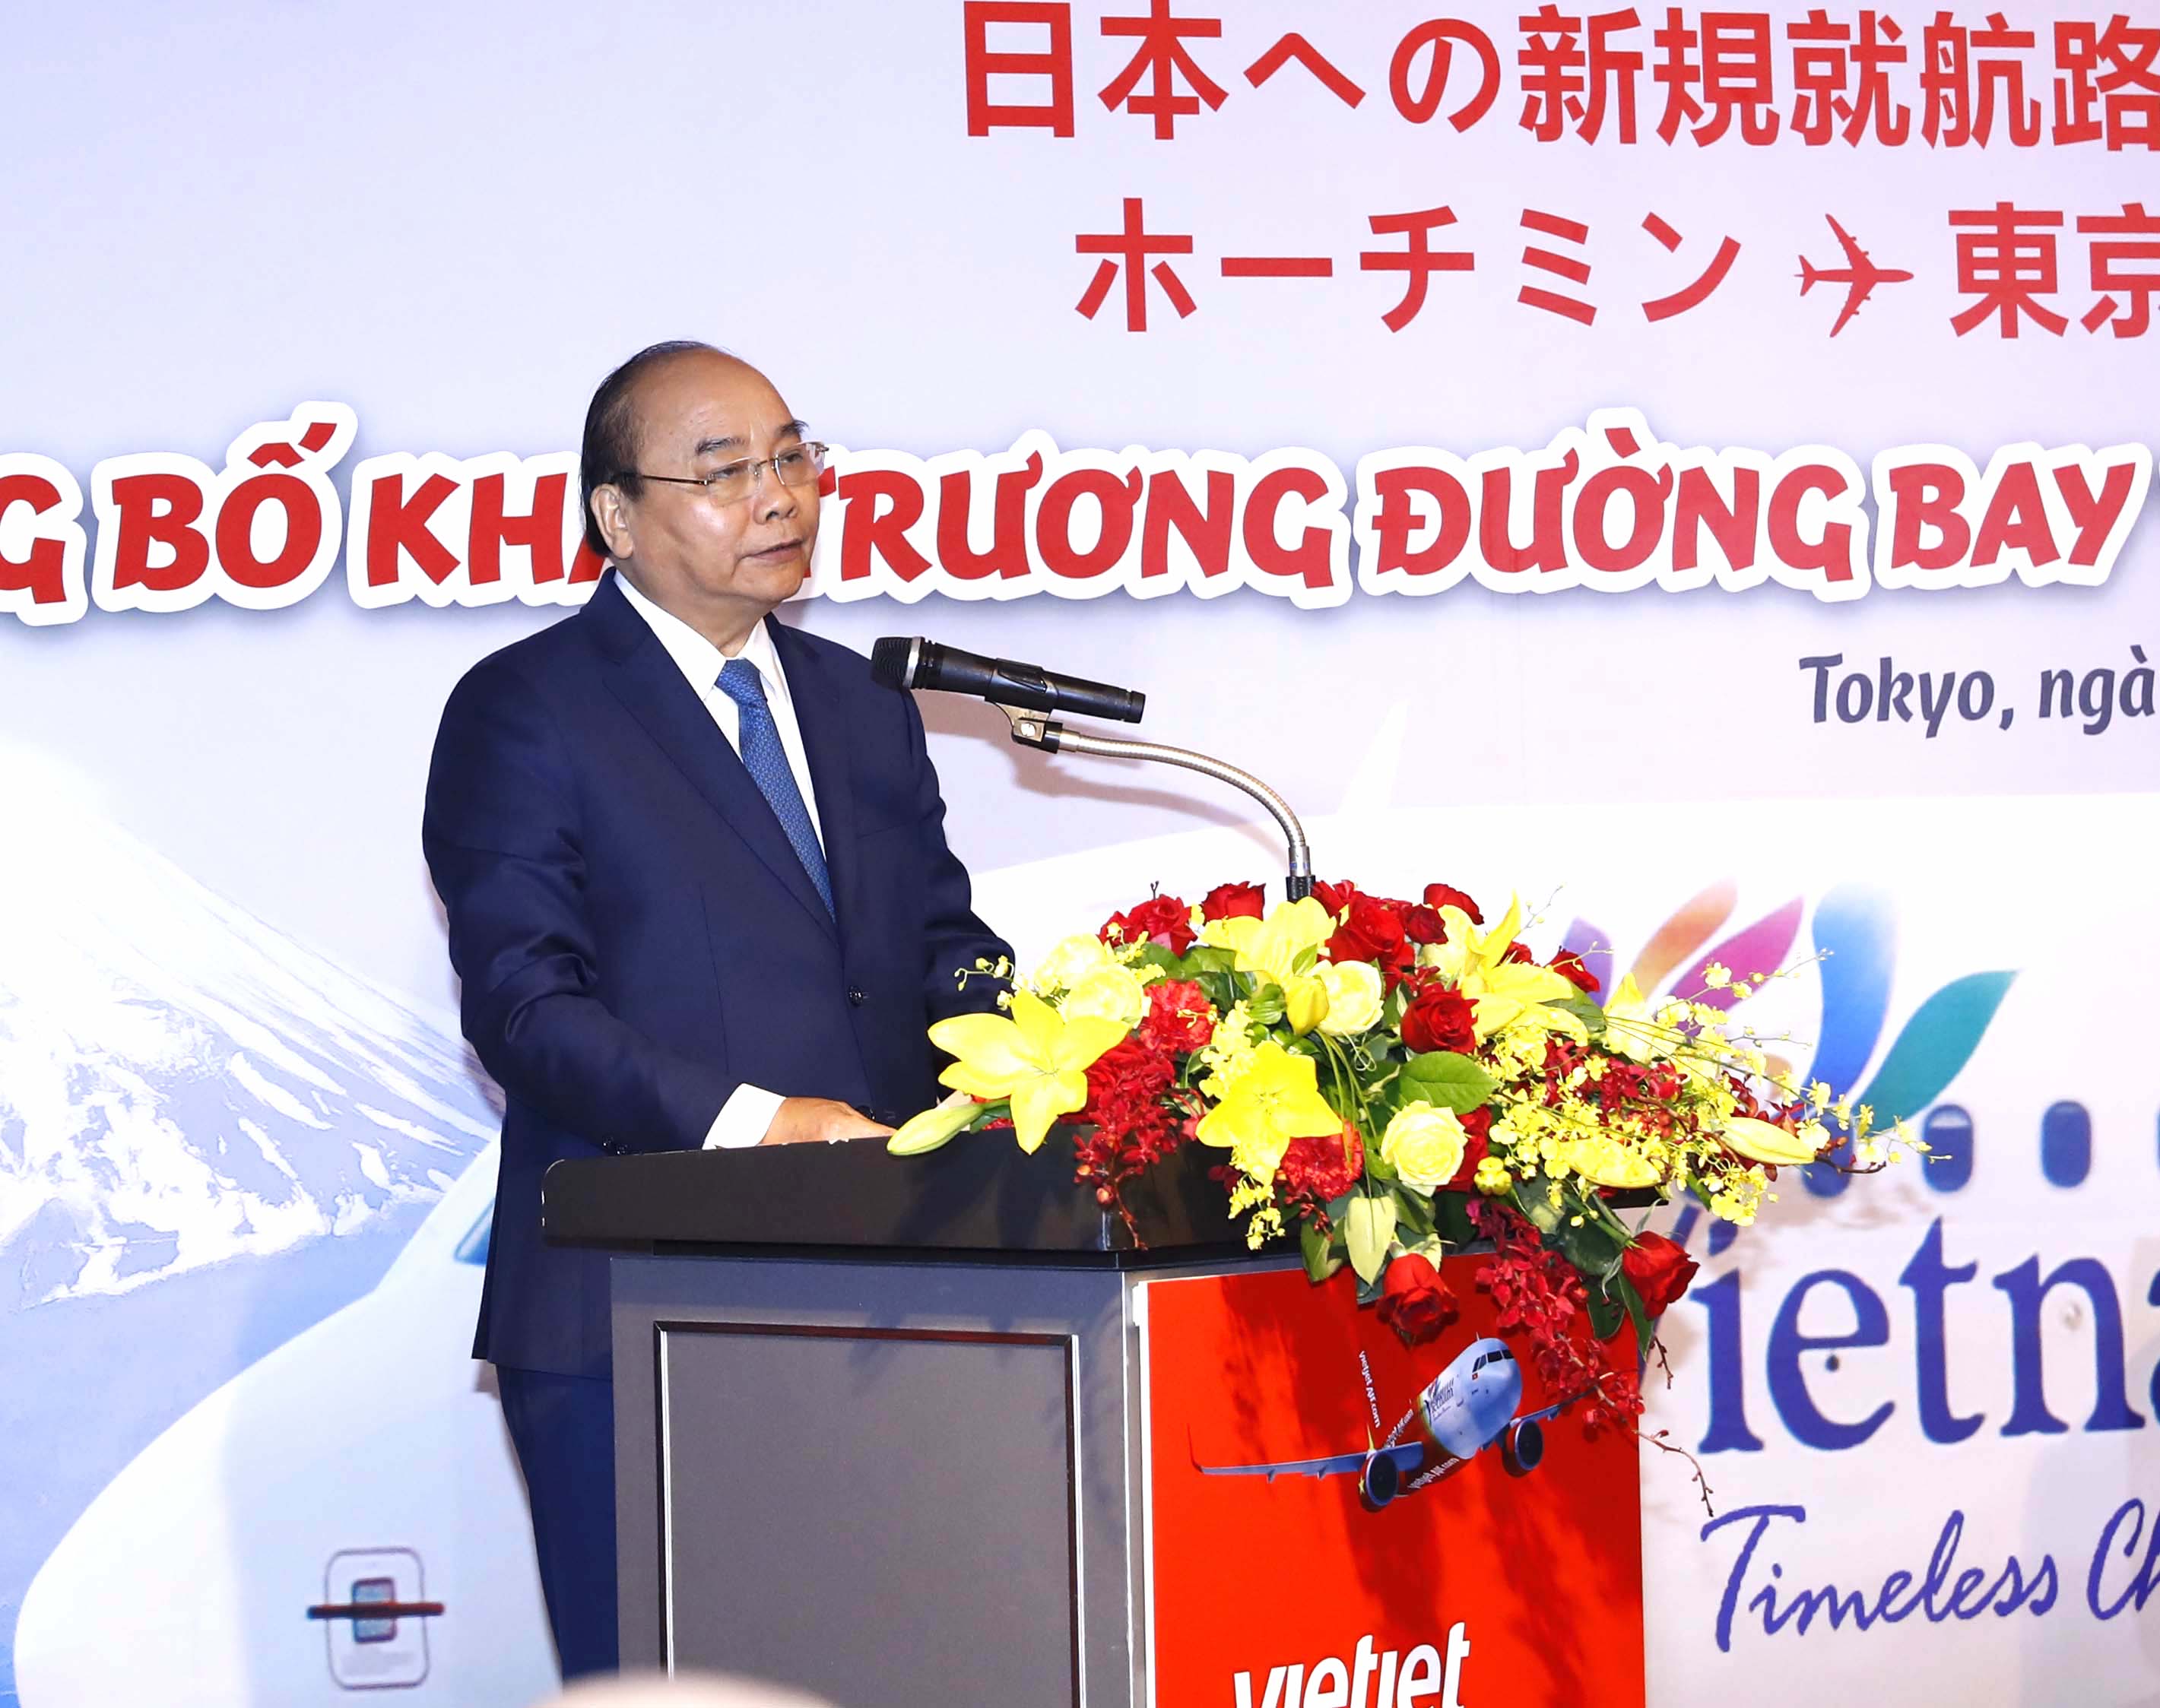 Vietnam's Prime Minister Nguyen Xuan Phuc attends and gives a congratulation remark at Vietjet’s ceremony n Tokyo on July 1, 2019. Photo: Vietjet